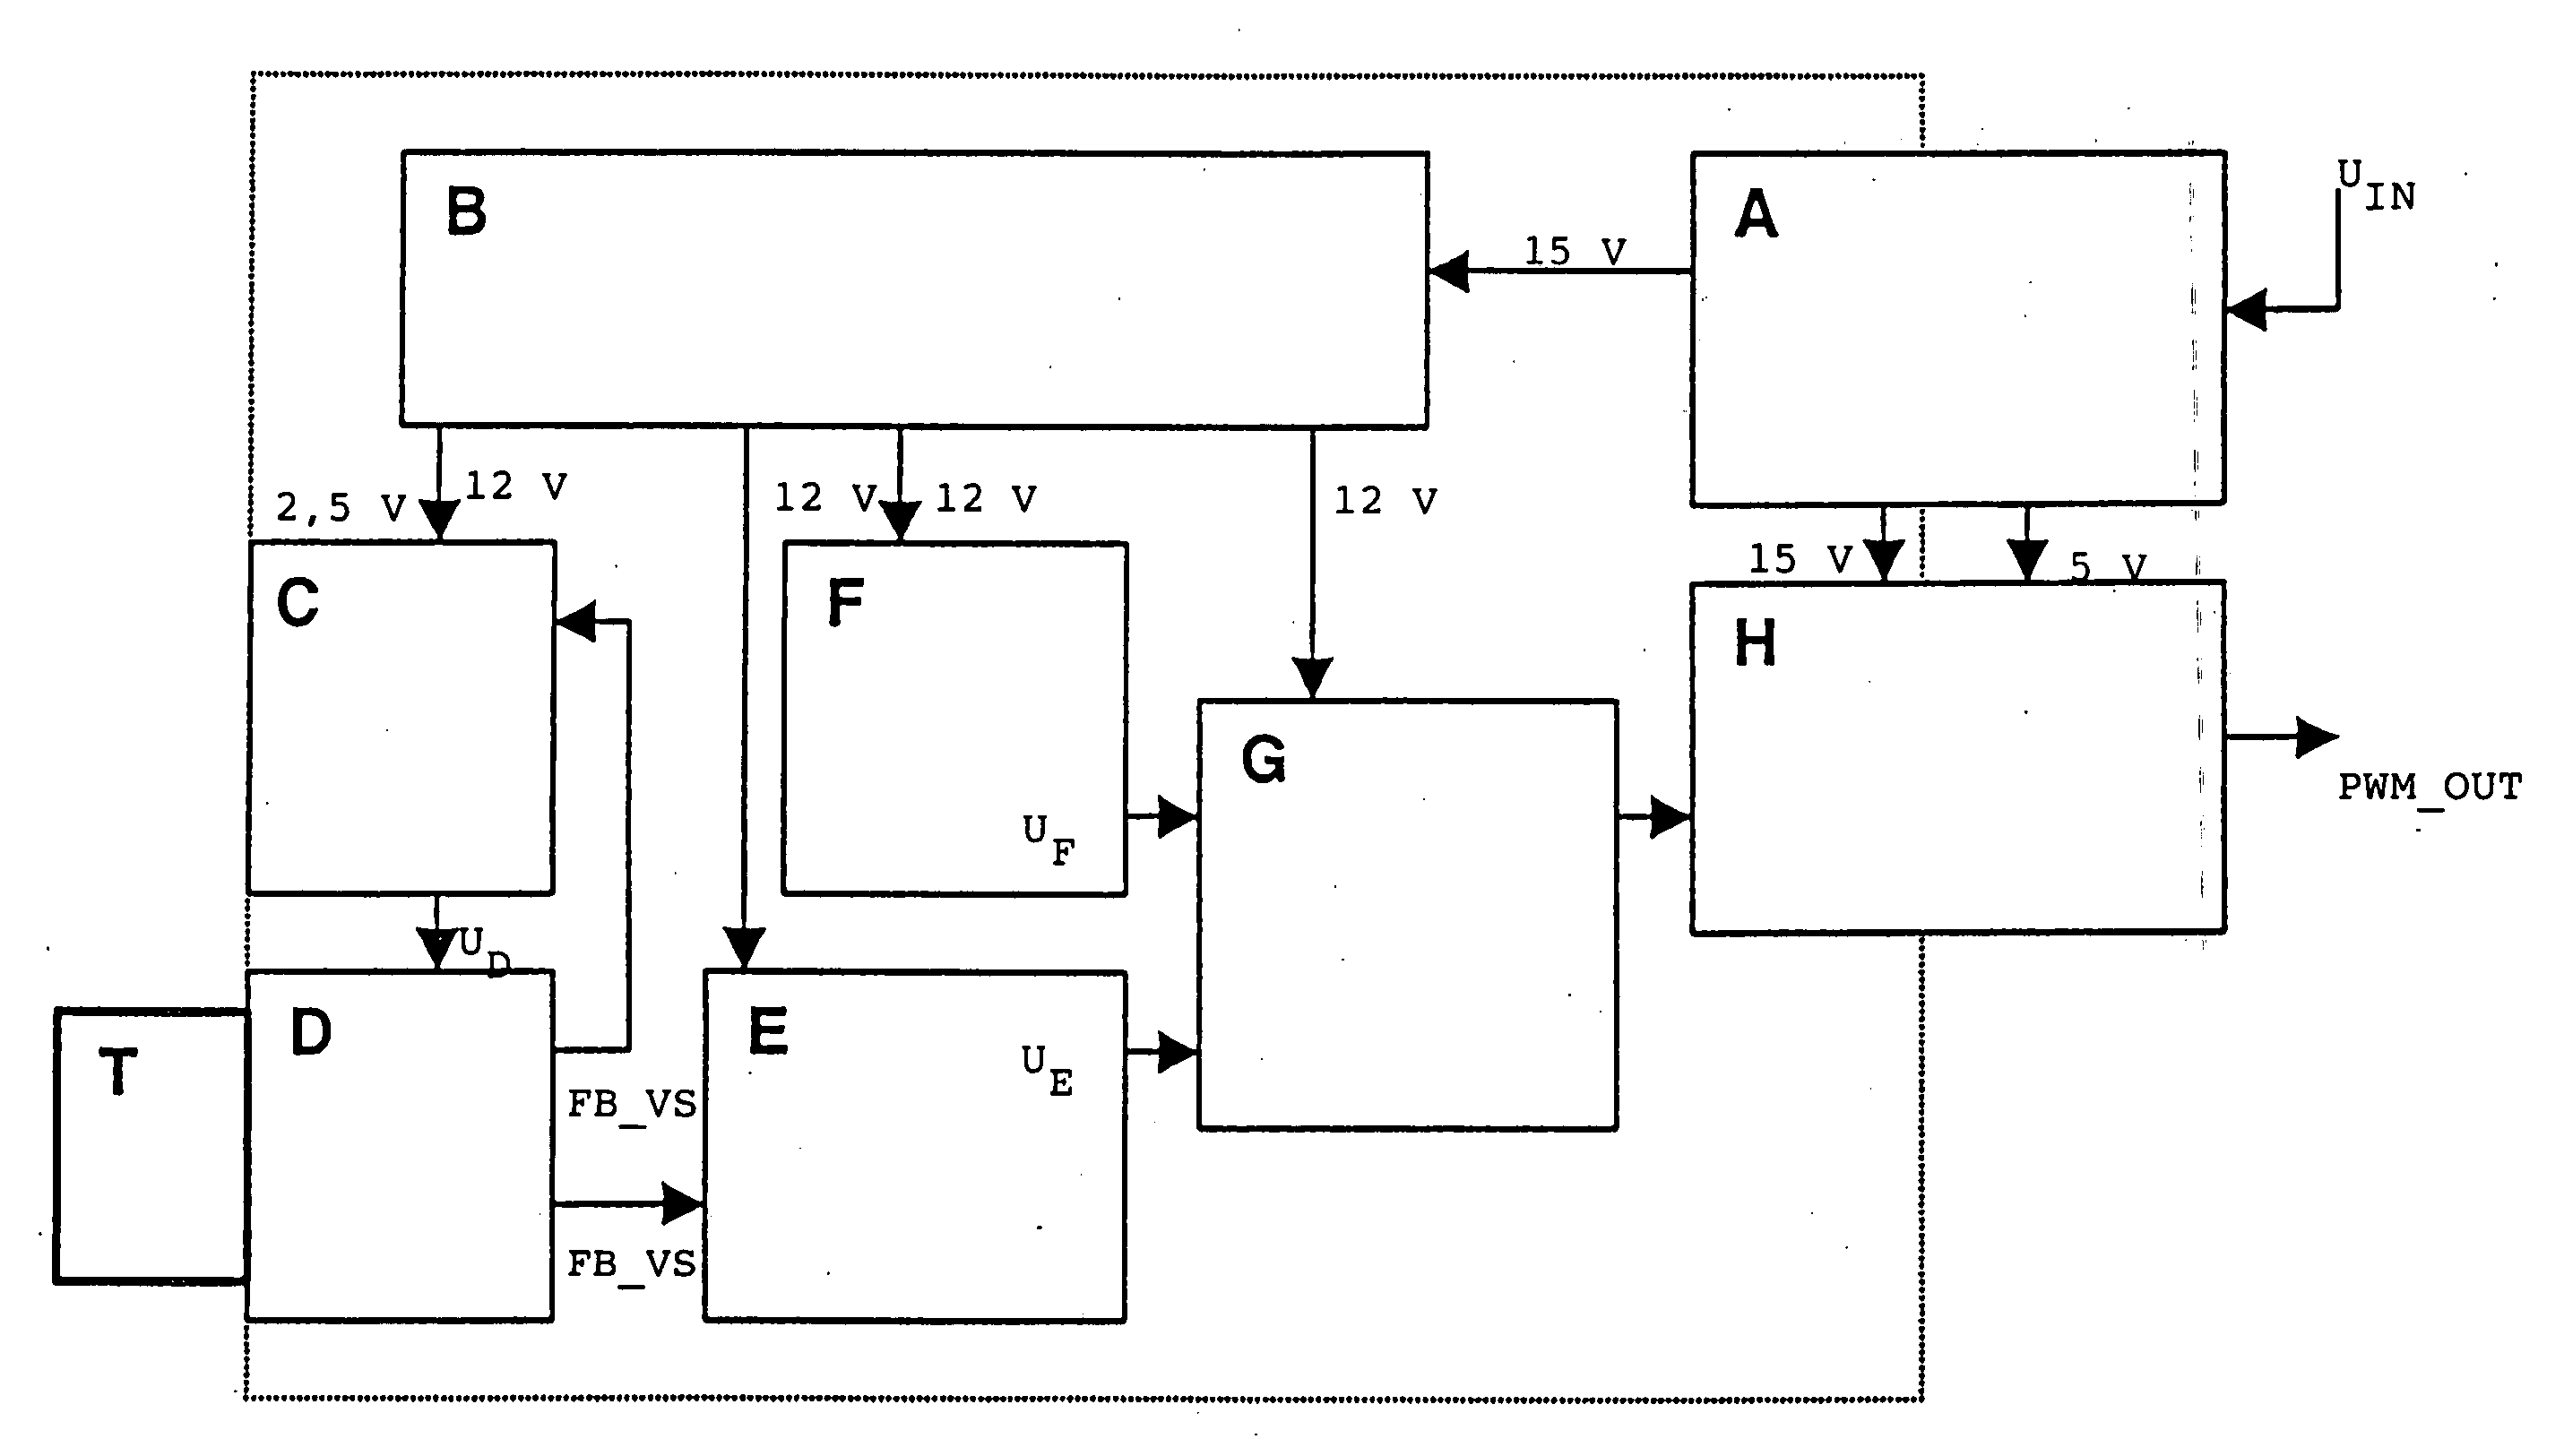 Isolated measurement circuit for sensor resistance